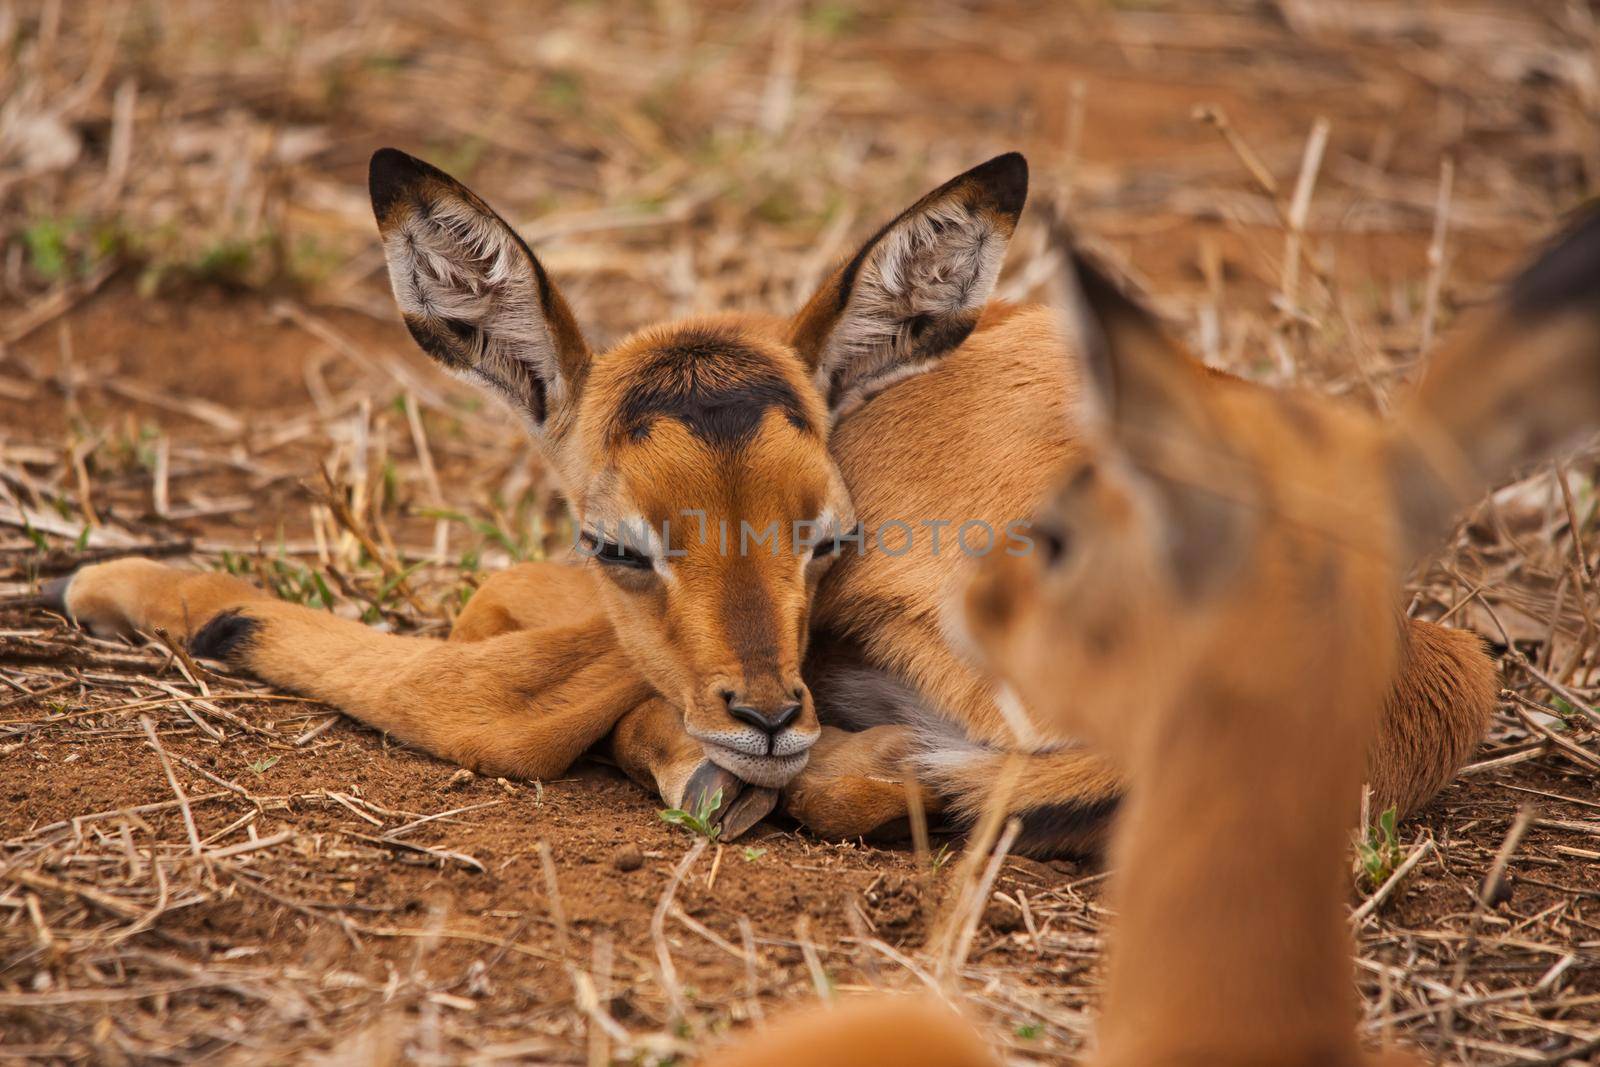 A very young  Impala (Aepyceros melampus) lamb in Kruger National Park. South Africa